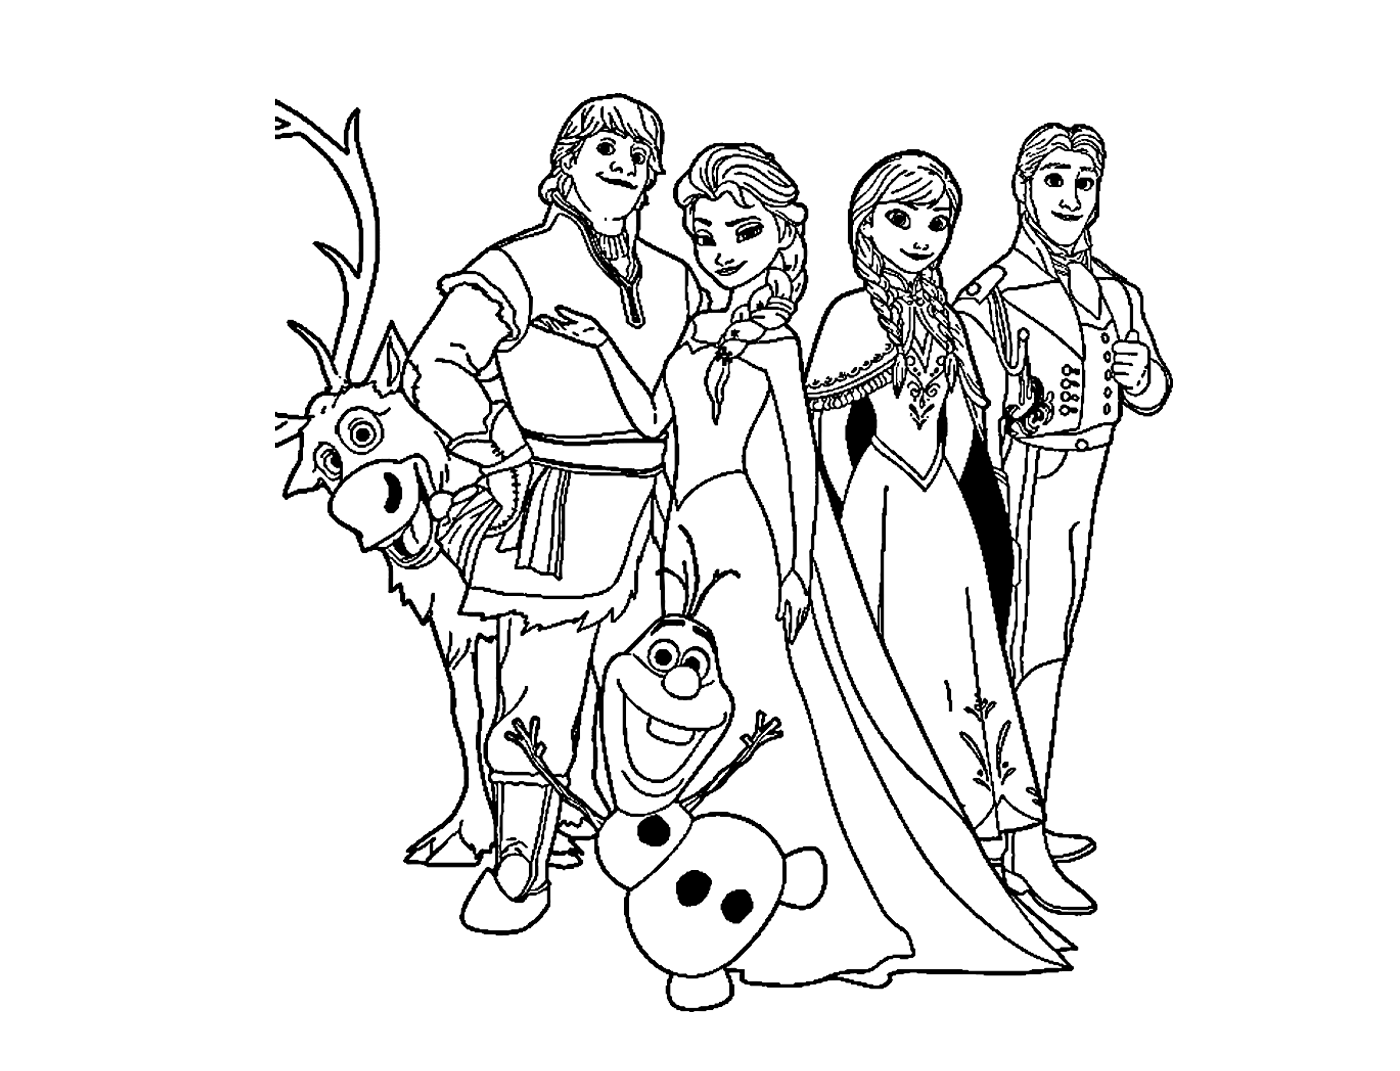 Frozen Coloring Pages - Coloring Pages For Kids And Adults